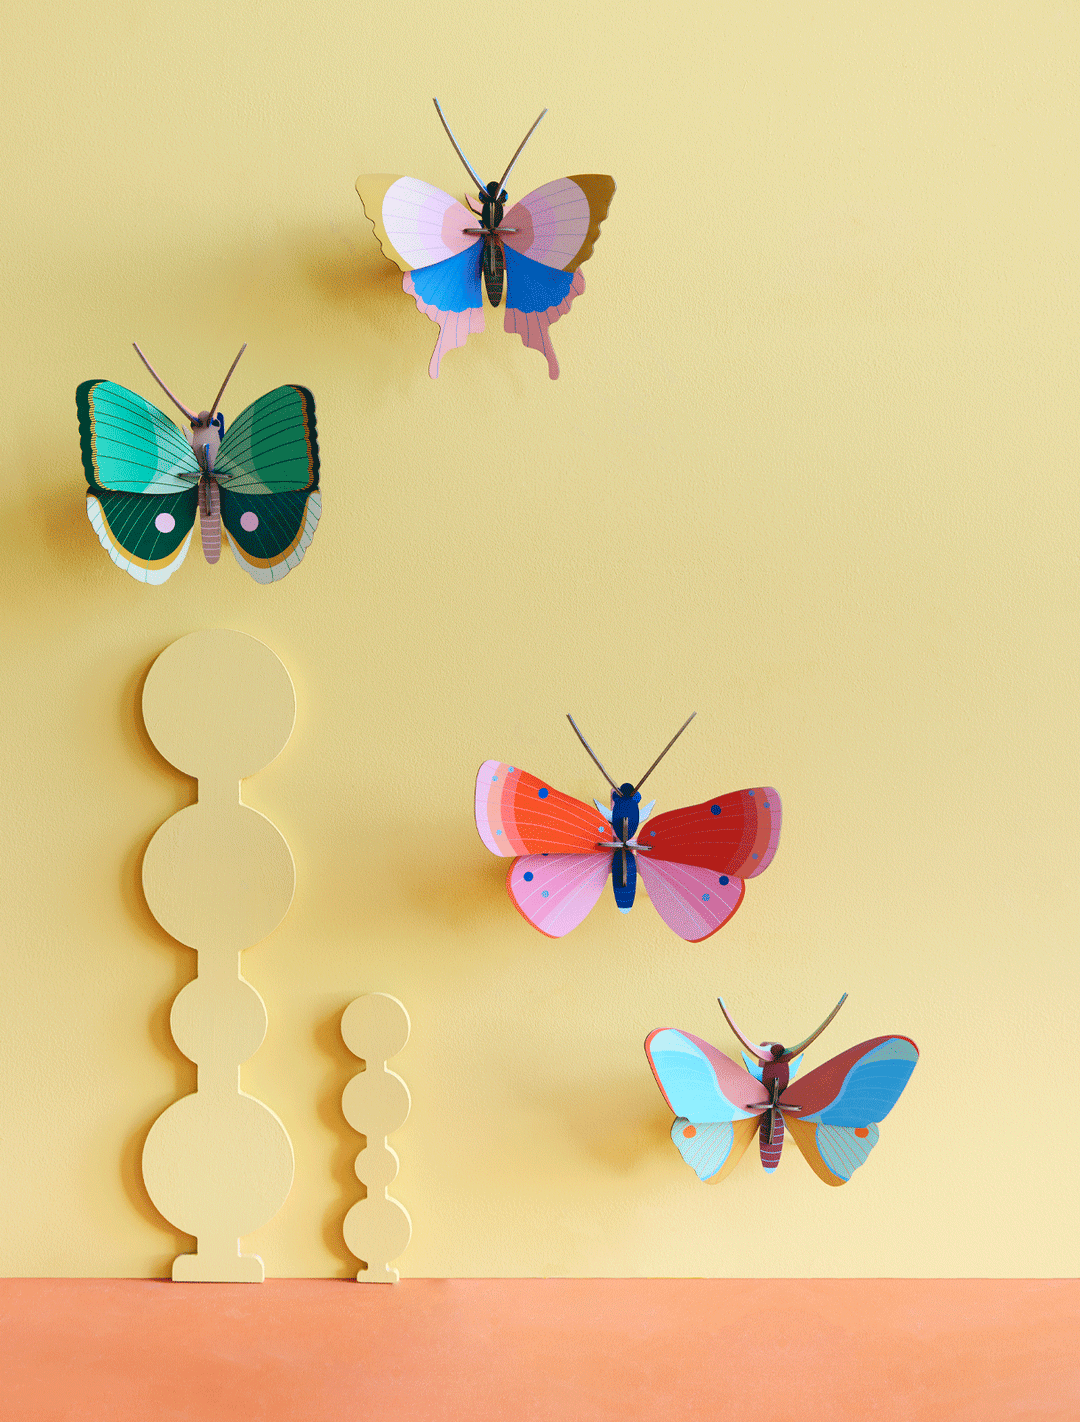 MAQUETA - Studio Roof, Speckled Copper Butterfly